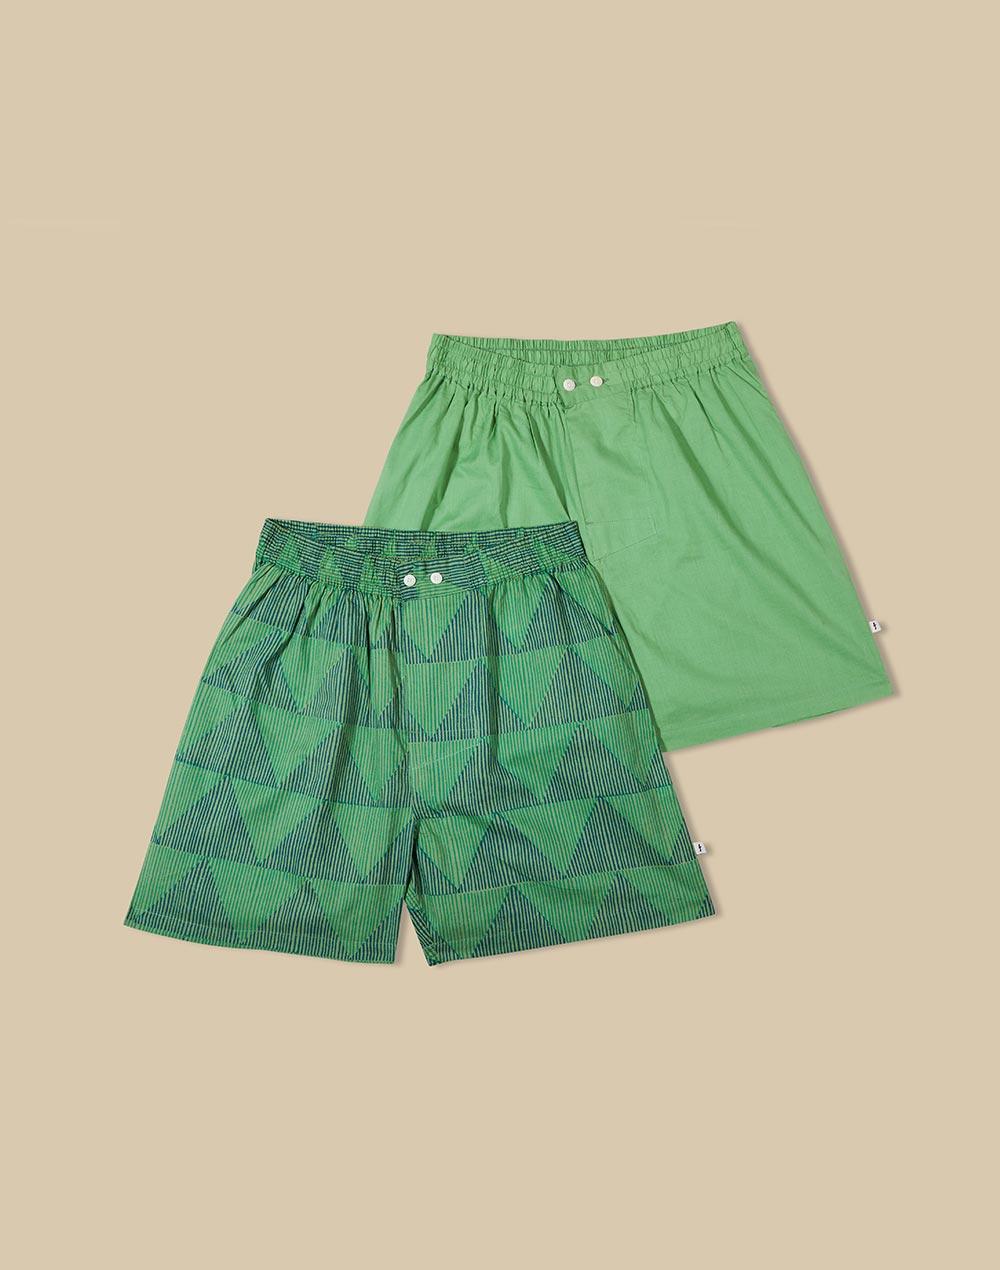 green-cotton-full-elasticated-boxer-shorts-pack-of-2